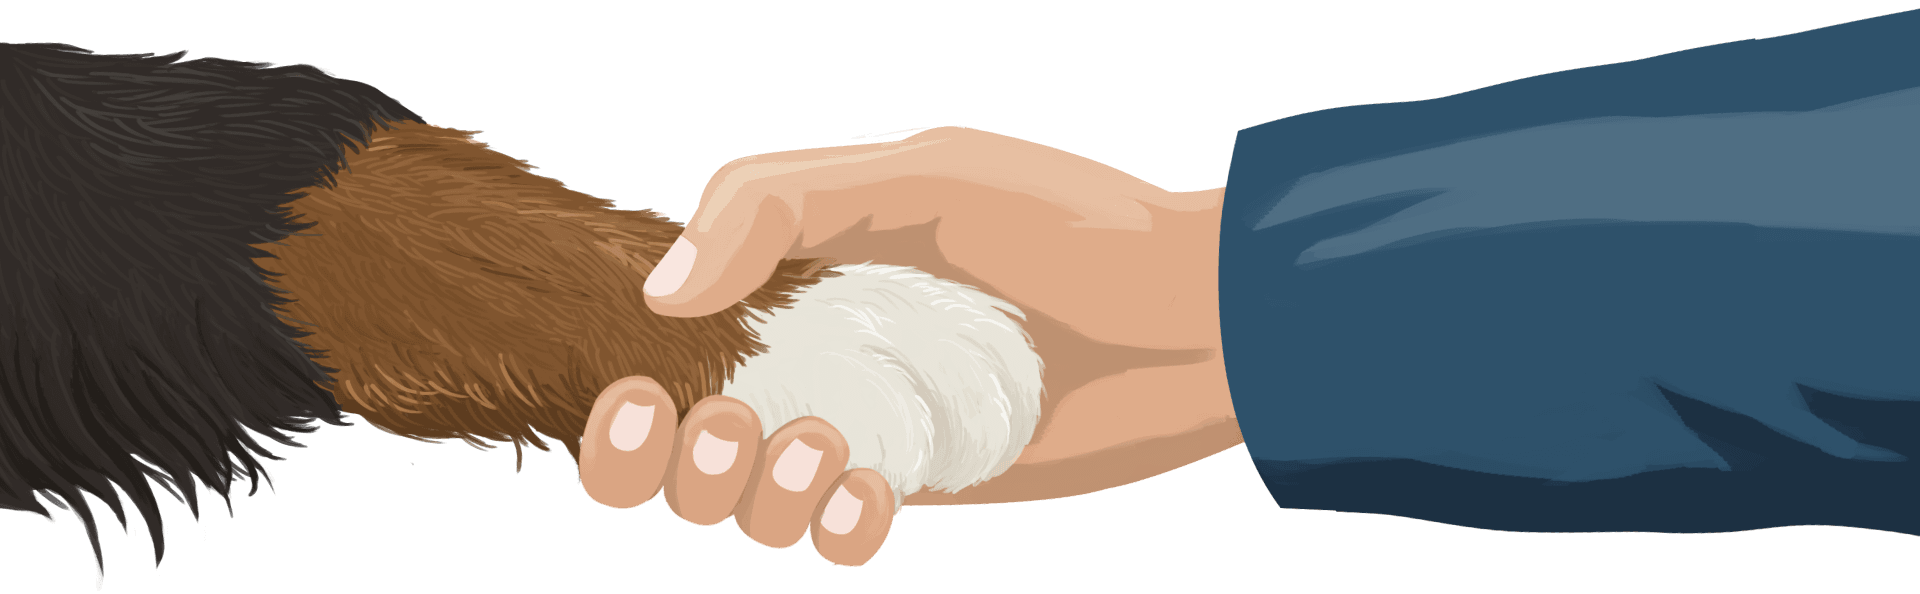 Illustration of Bernie's paw shaking a human hand.